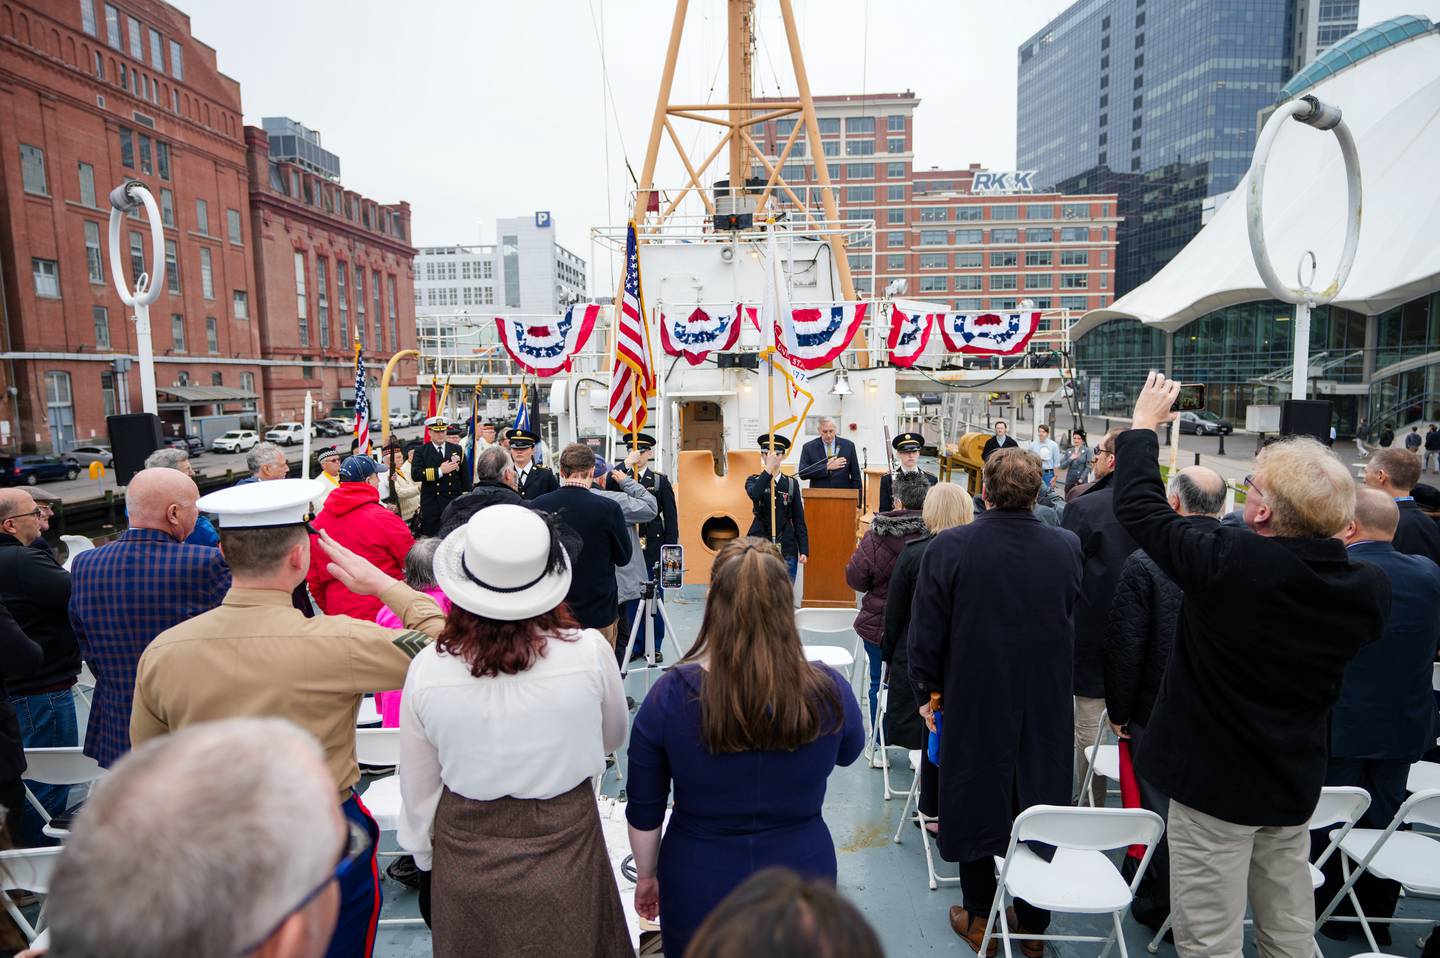 The 81st Anniversary of the Pearl Harbor Memorial Ceremony took place on the historic U.S. Coast Guard Cutter WHEC-37, in Baltimore, Md., on December 7, 2022.